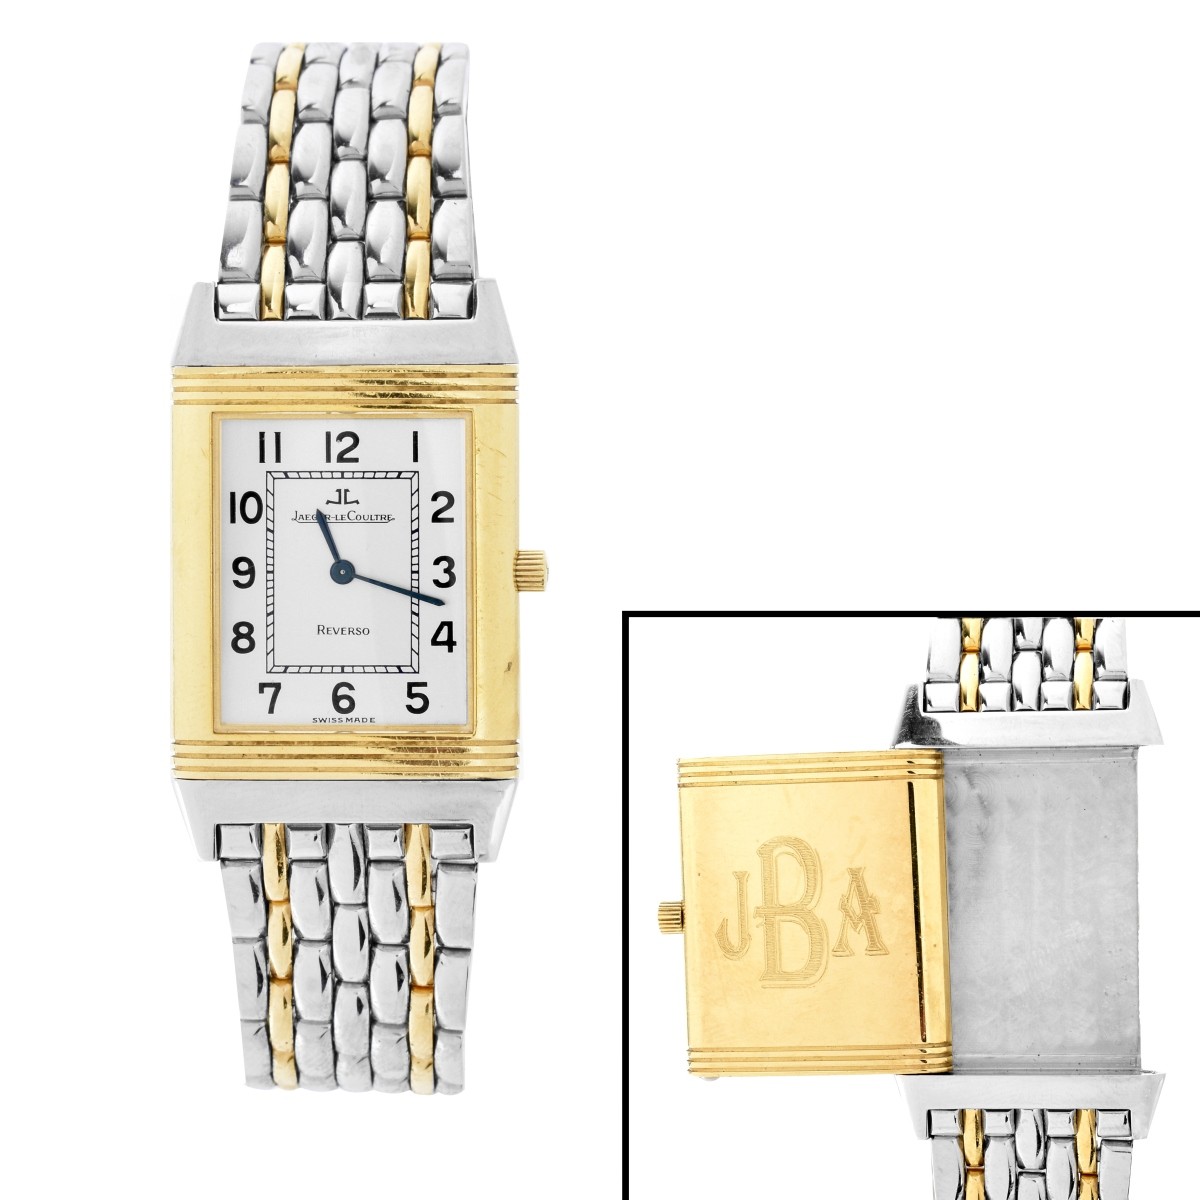 Jaeger-LeCoultre Reverso Watch